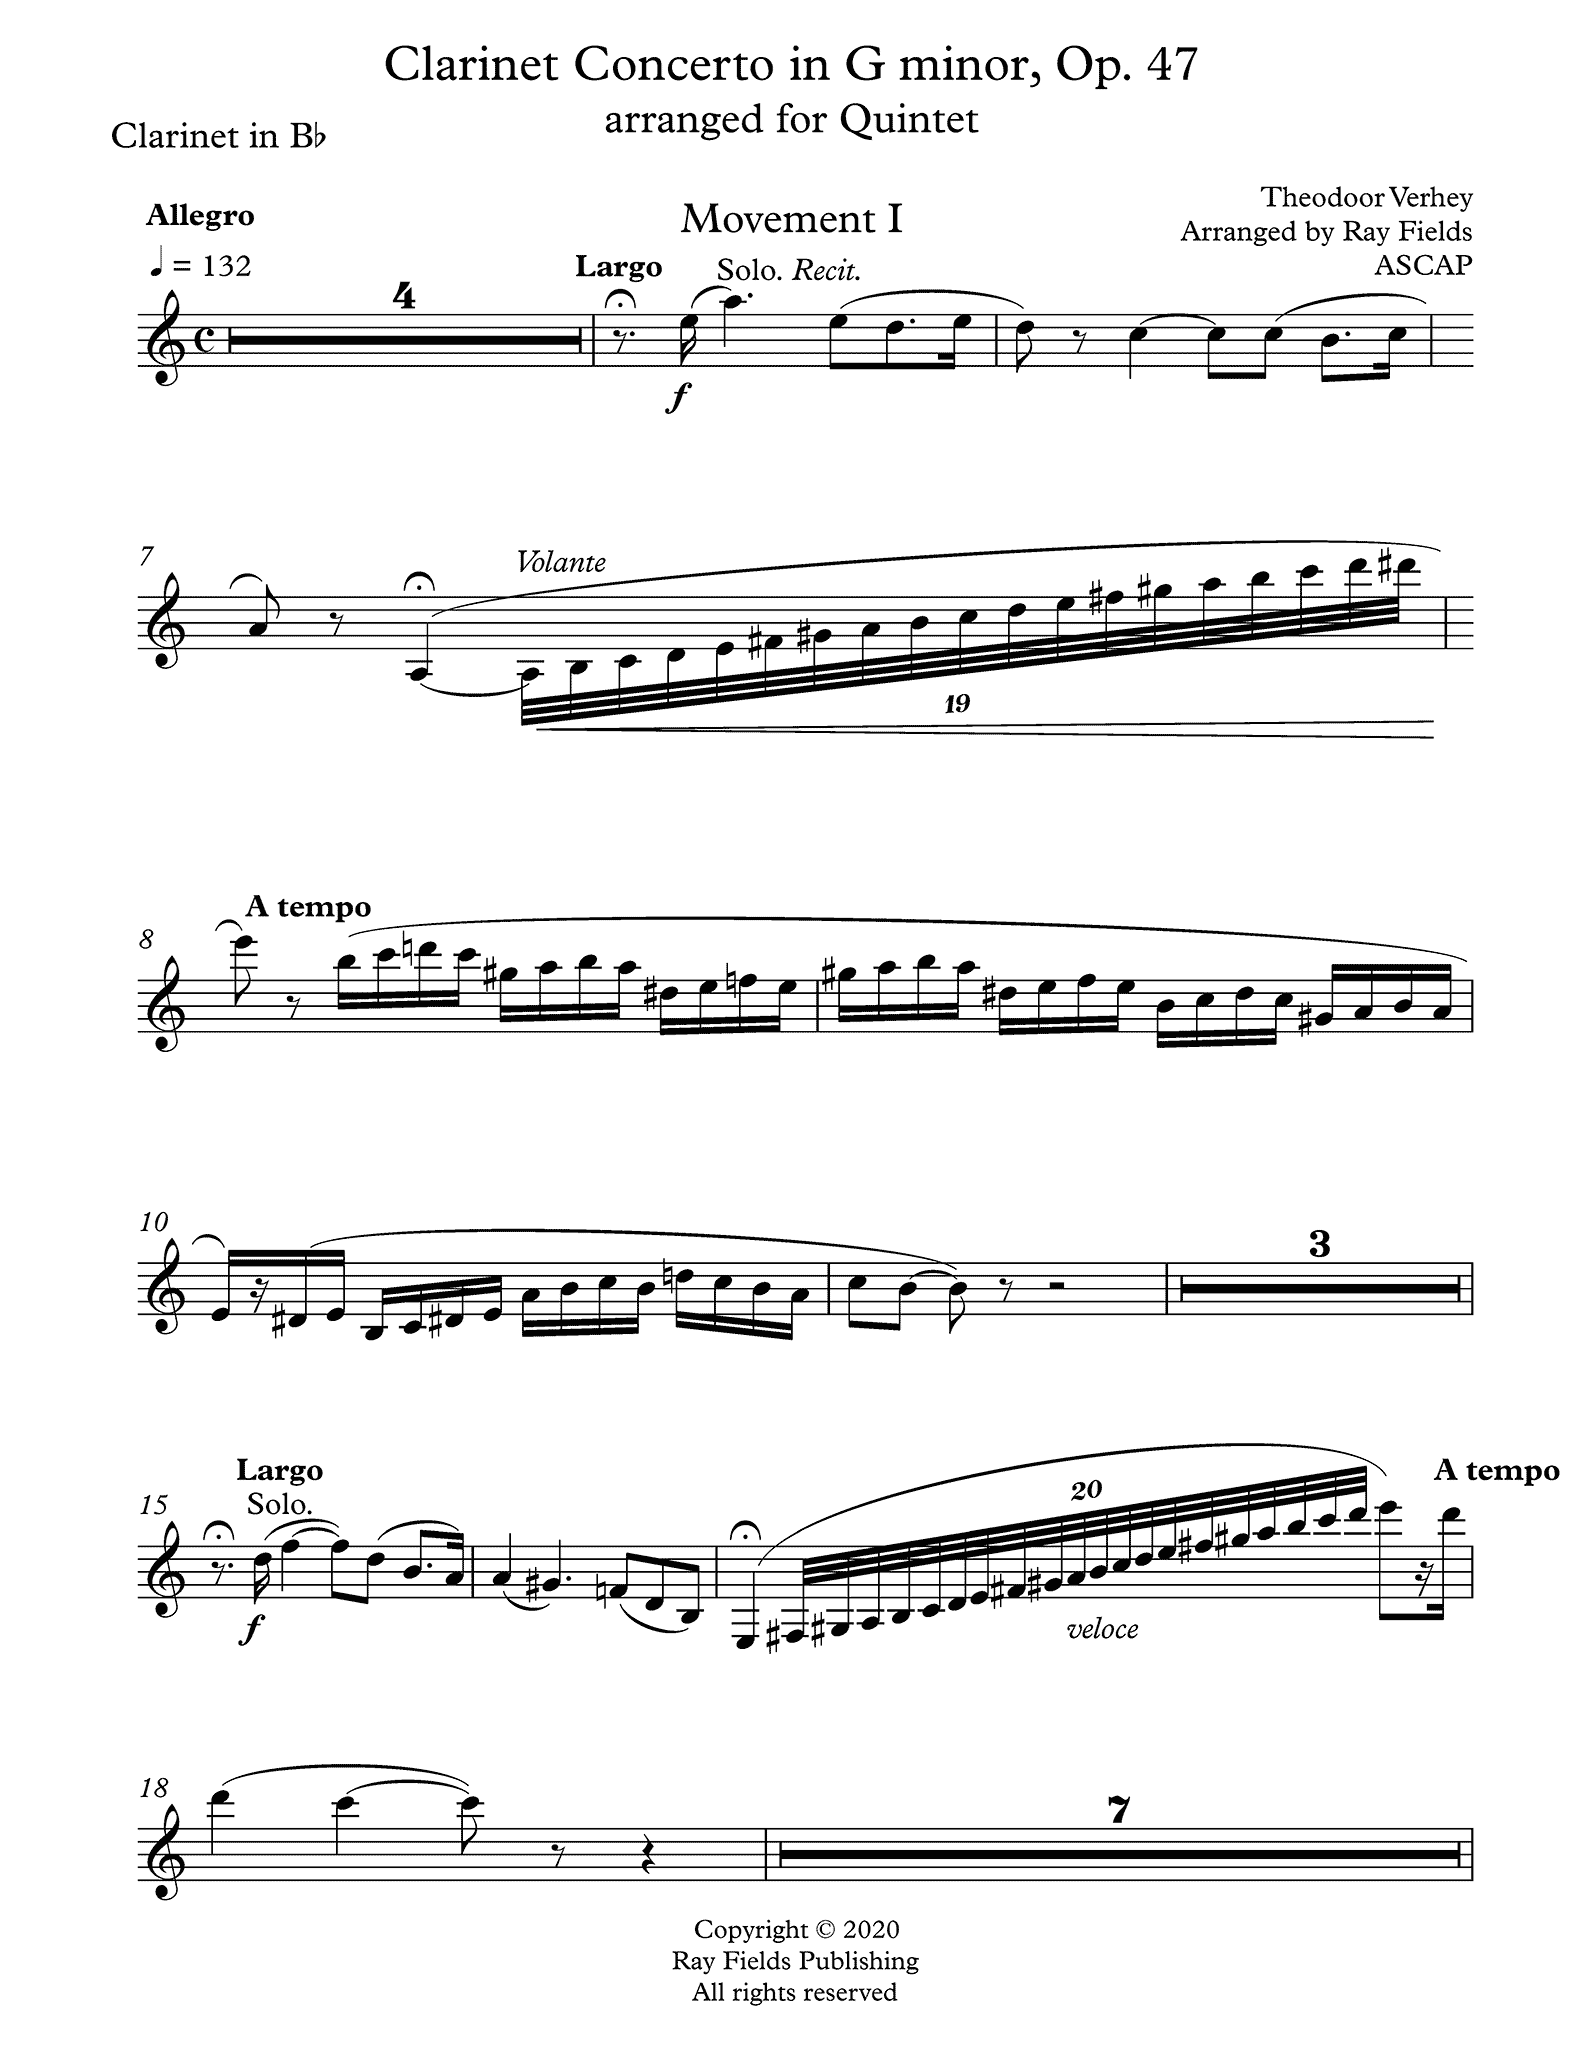 Verhey Clarinet Concerto, Op. 47 arranged for clarinet quintet by Ray Fields solo part